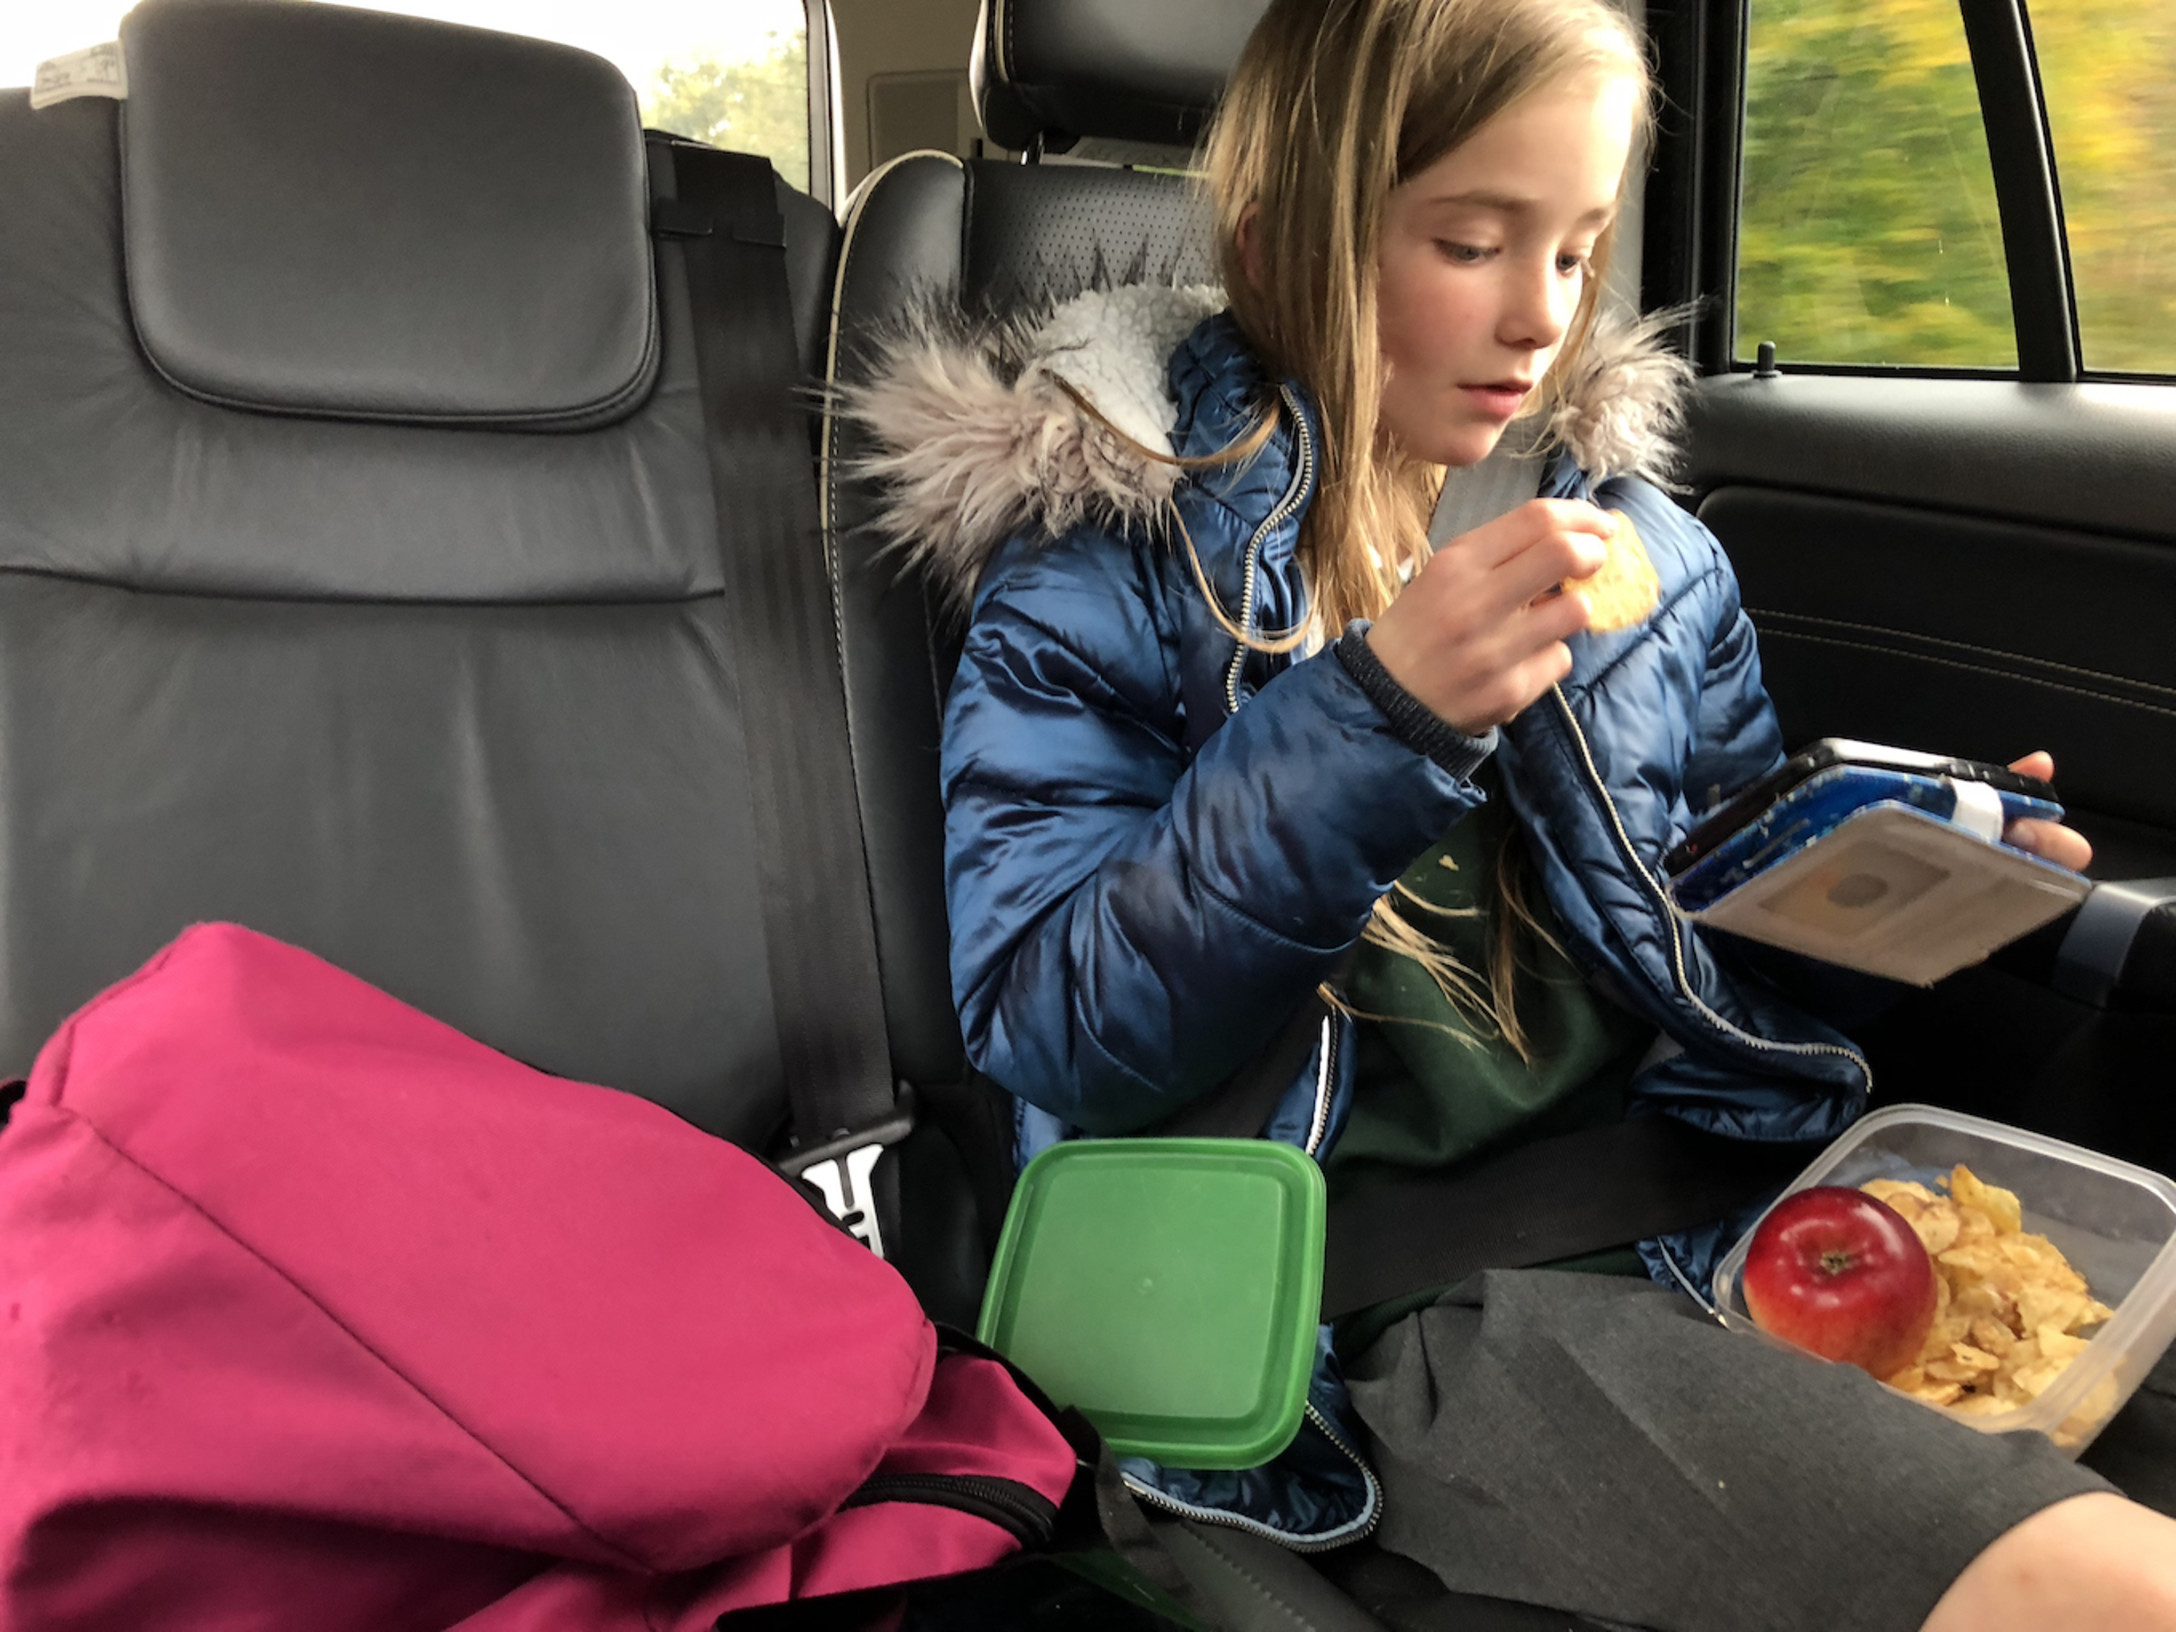 <p>"My parenting lightbulb moment was realizing that fully 90% of my kid's post-school meltdowns (including homework ones) were because she was STARVING after school. I've started packing car snacks for her to eat on the way home and it makes everything easier once we get there." – Jamie J., Arizona</p>